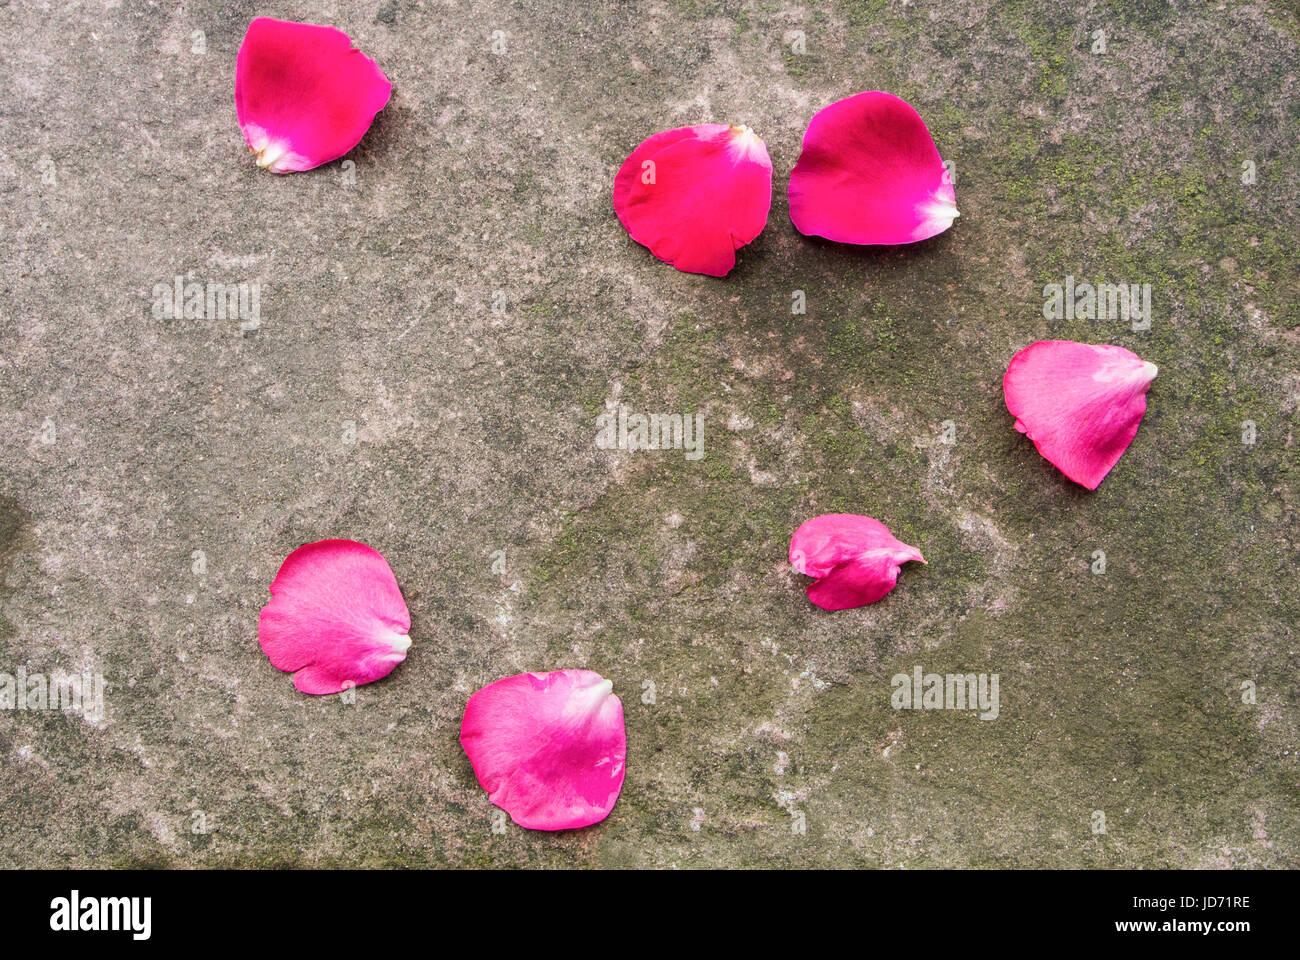 Stone background with moss and fallen dark pink rose petals, Walldorf, Germany. Stock Photo